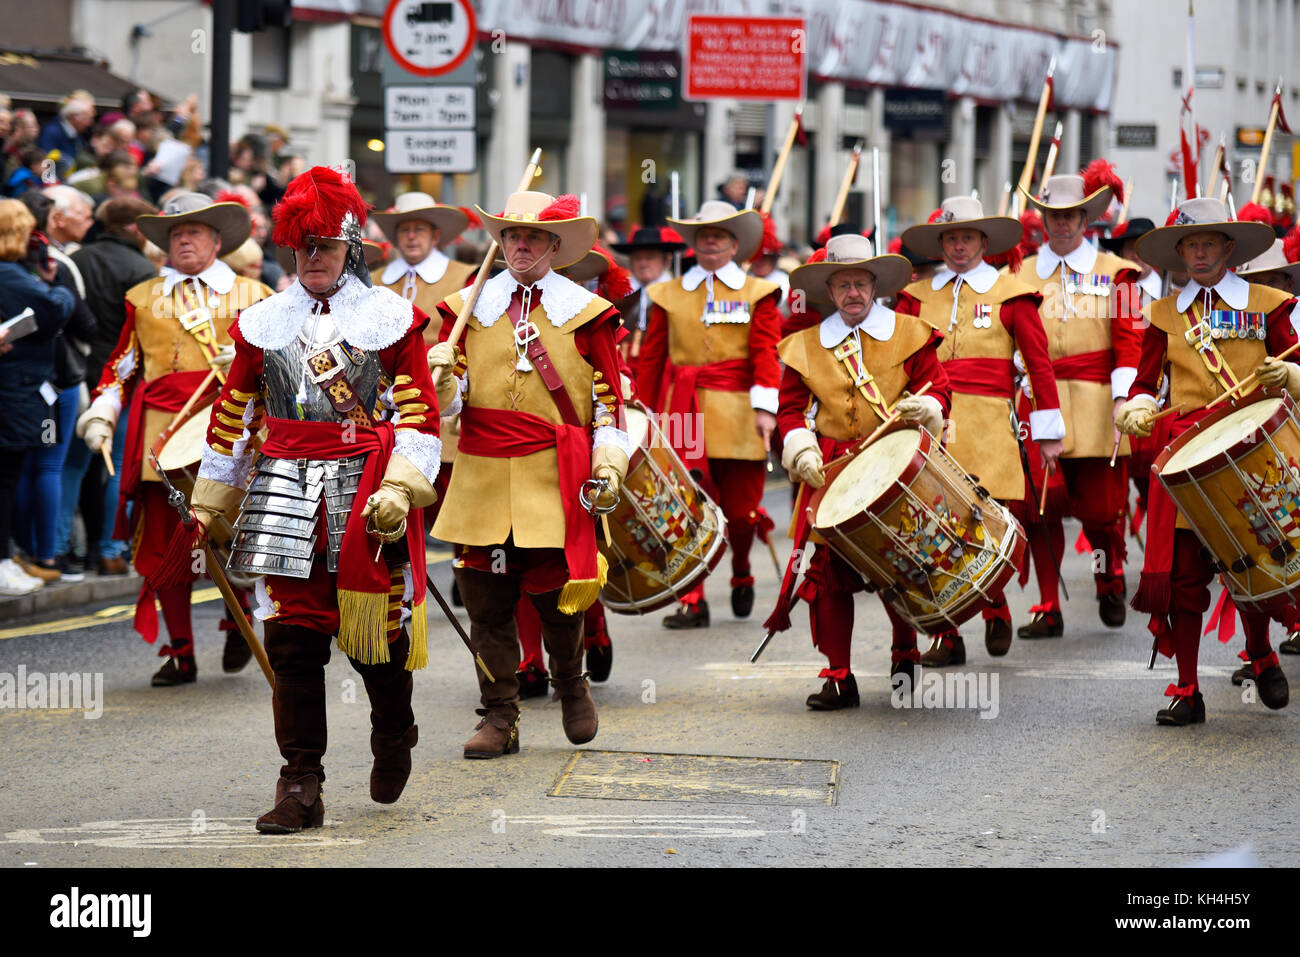 Company of Pikemen & Musketeers Honourable Artillery Company at the Lord Mayor's Show Procession Parade along Cheapside, London Stock Photo